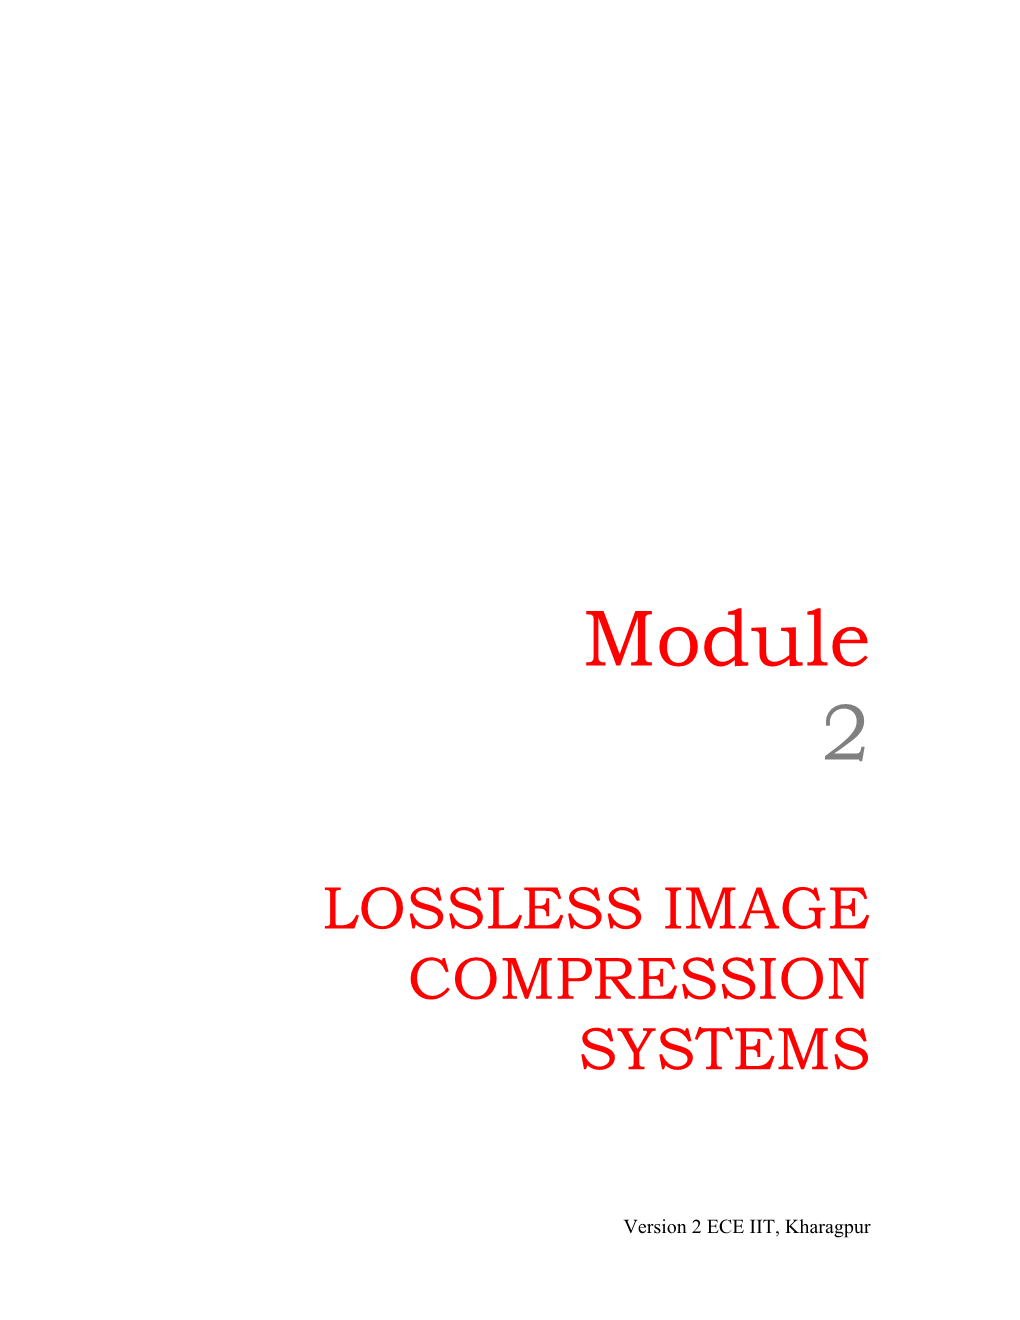 Lossless Image Compression Systems